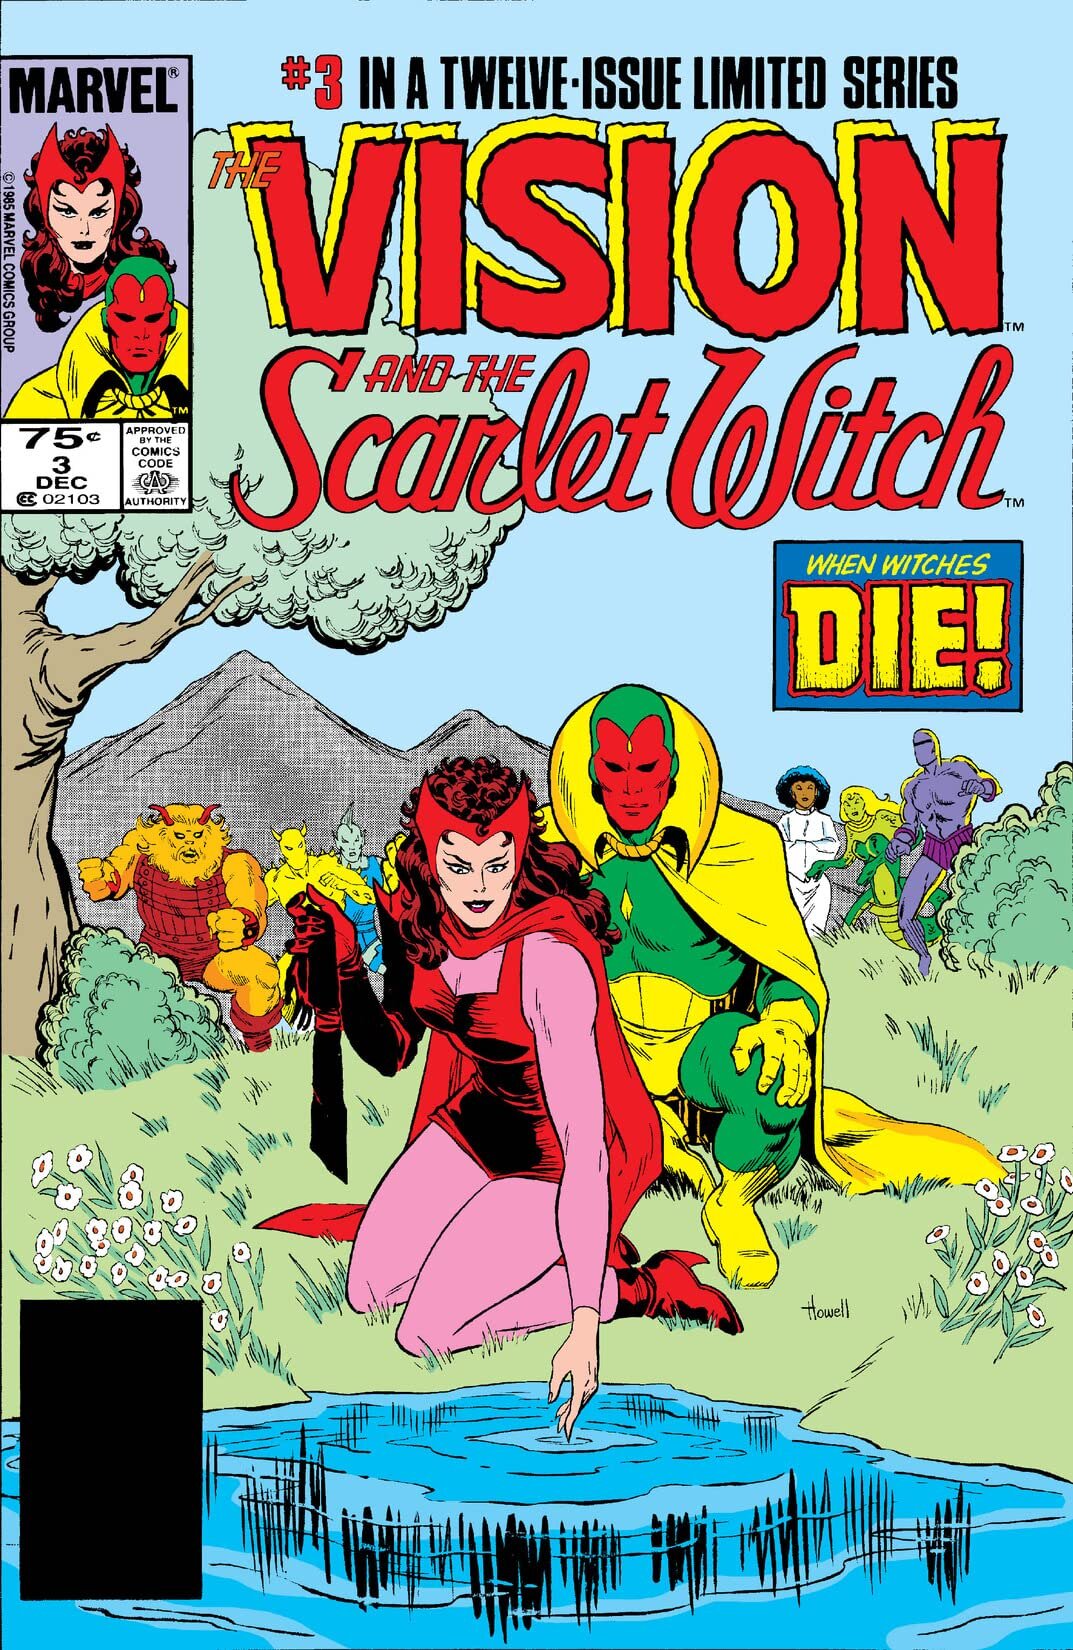 Scarlet Witch (2015 - 2017), Comic Series